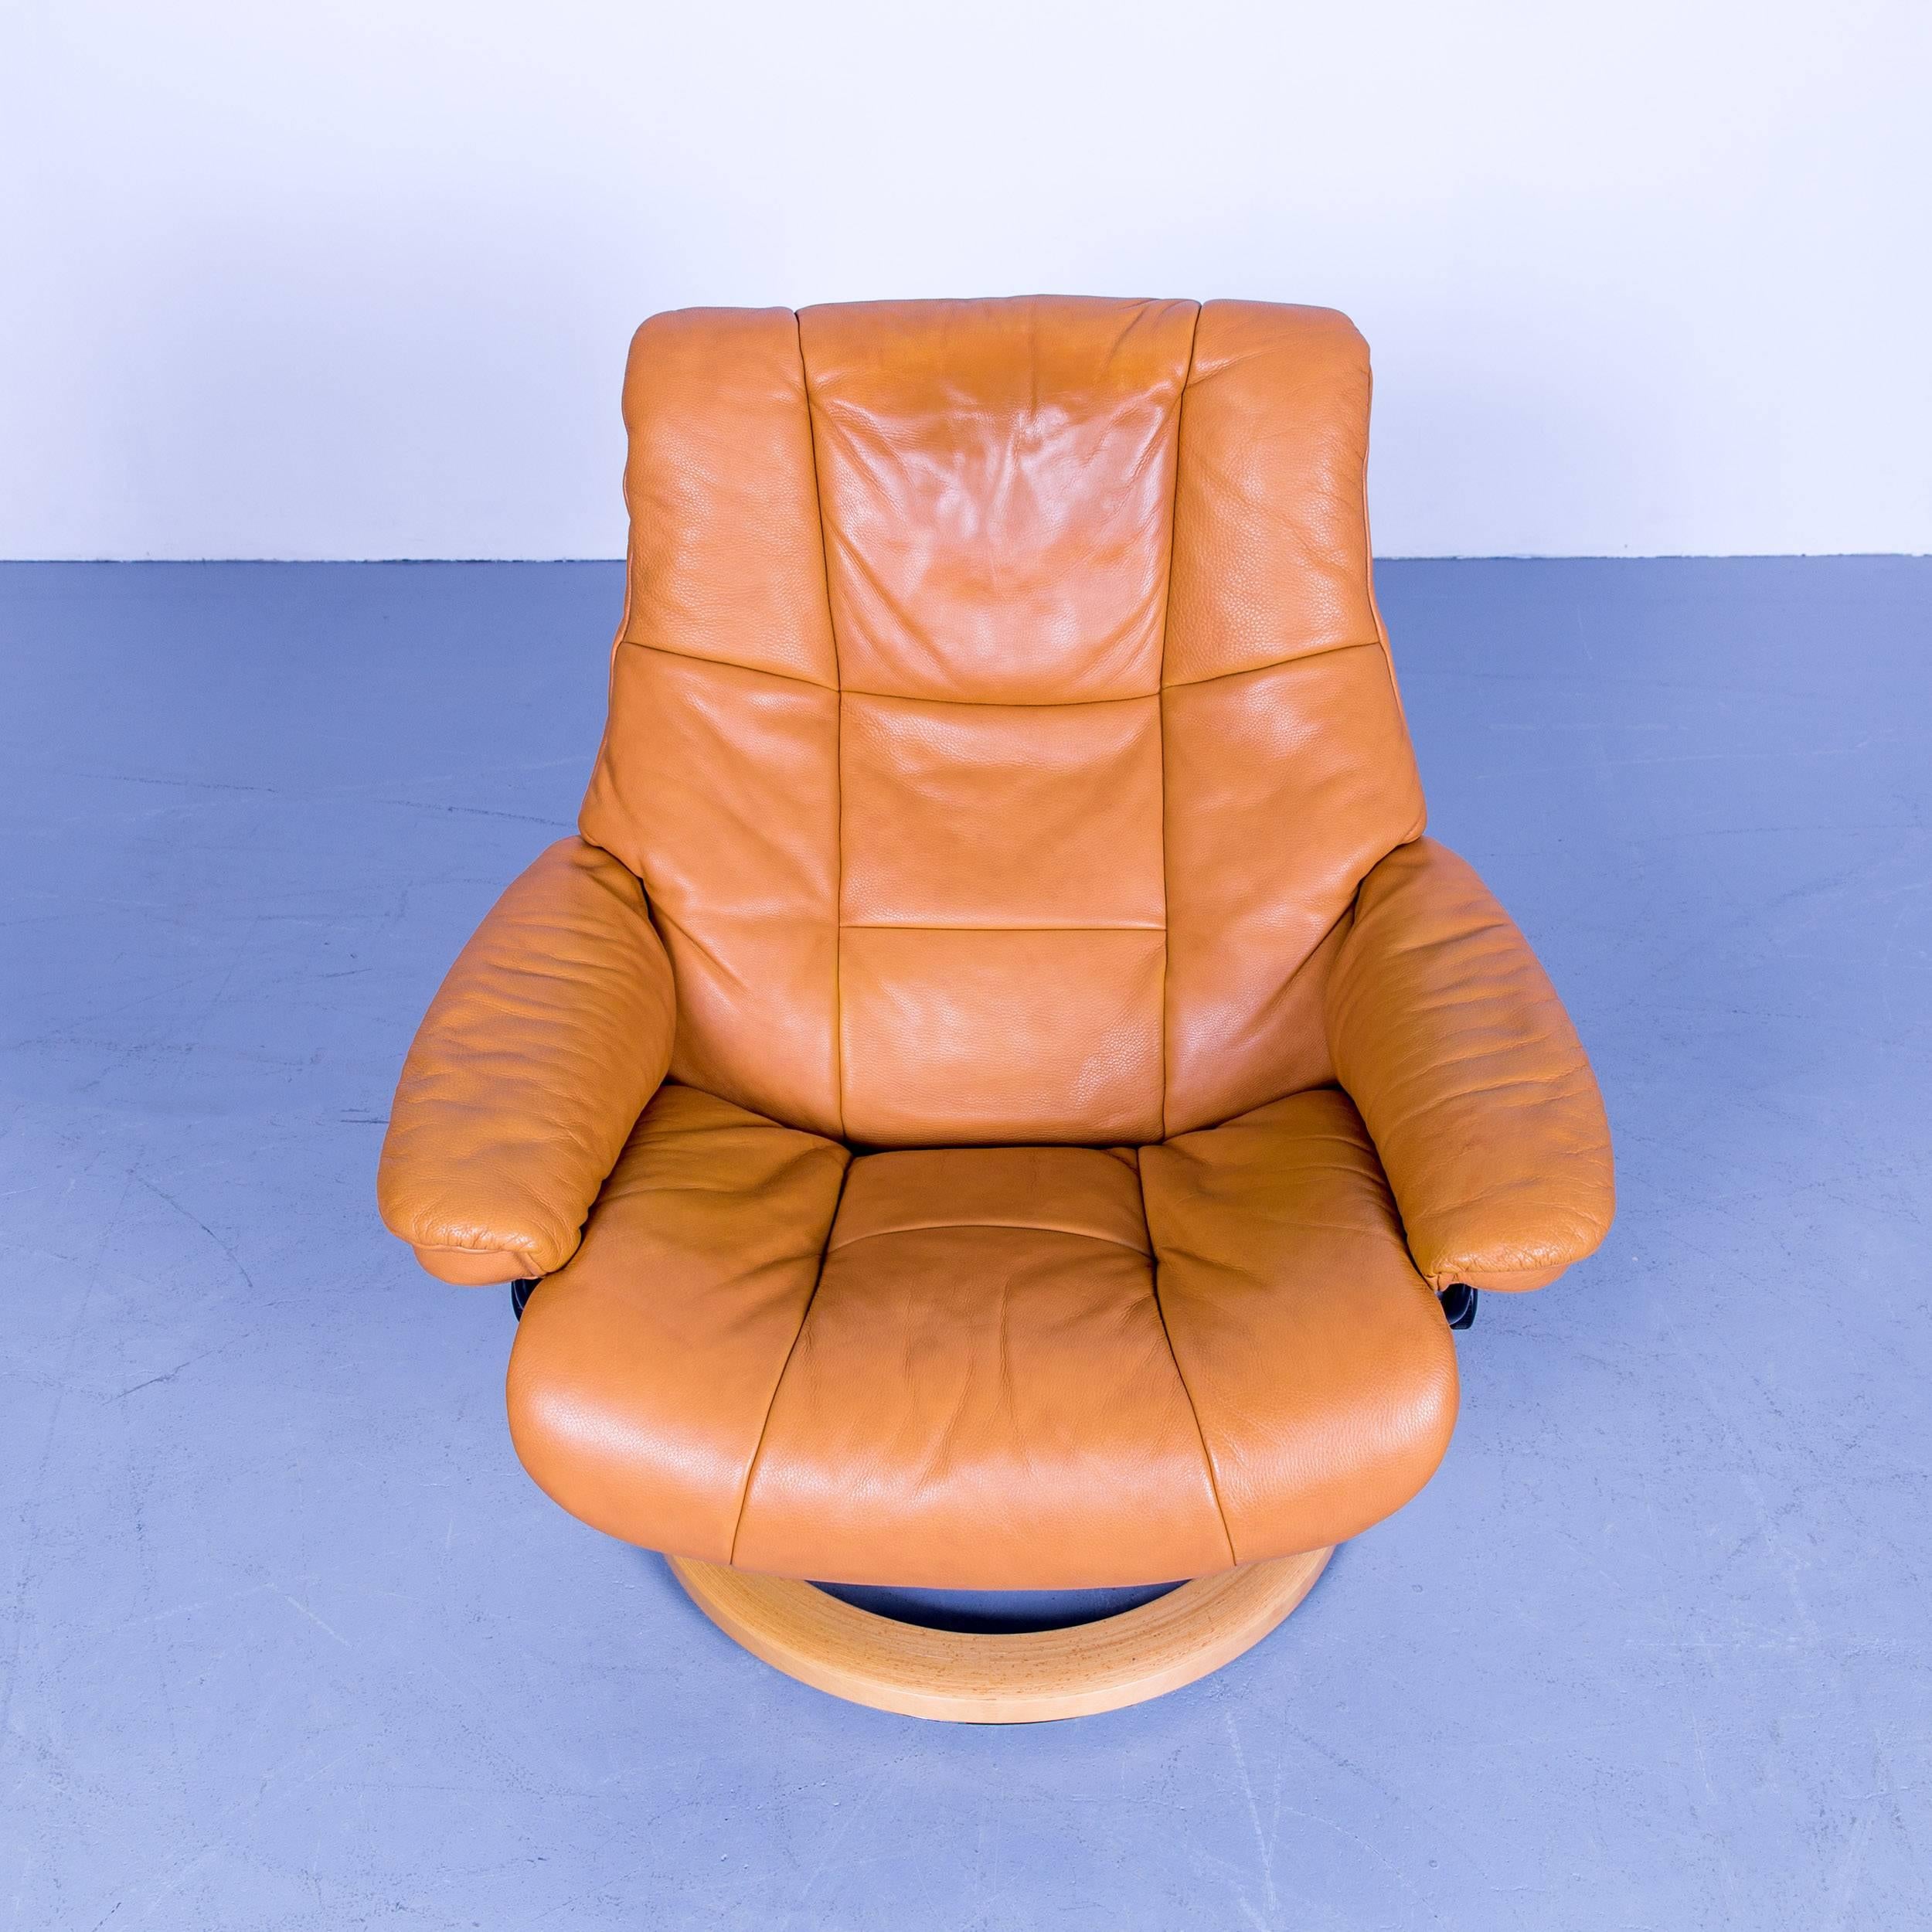 Contemporary Stressless Mayfair Relax Armchair Footstool Orange Brown Leather Relax Recliner